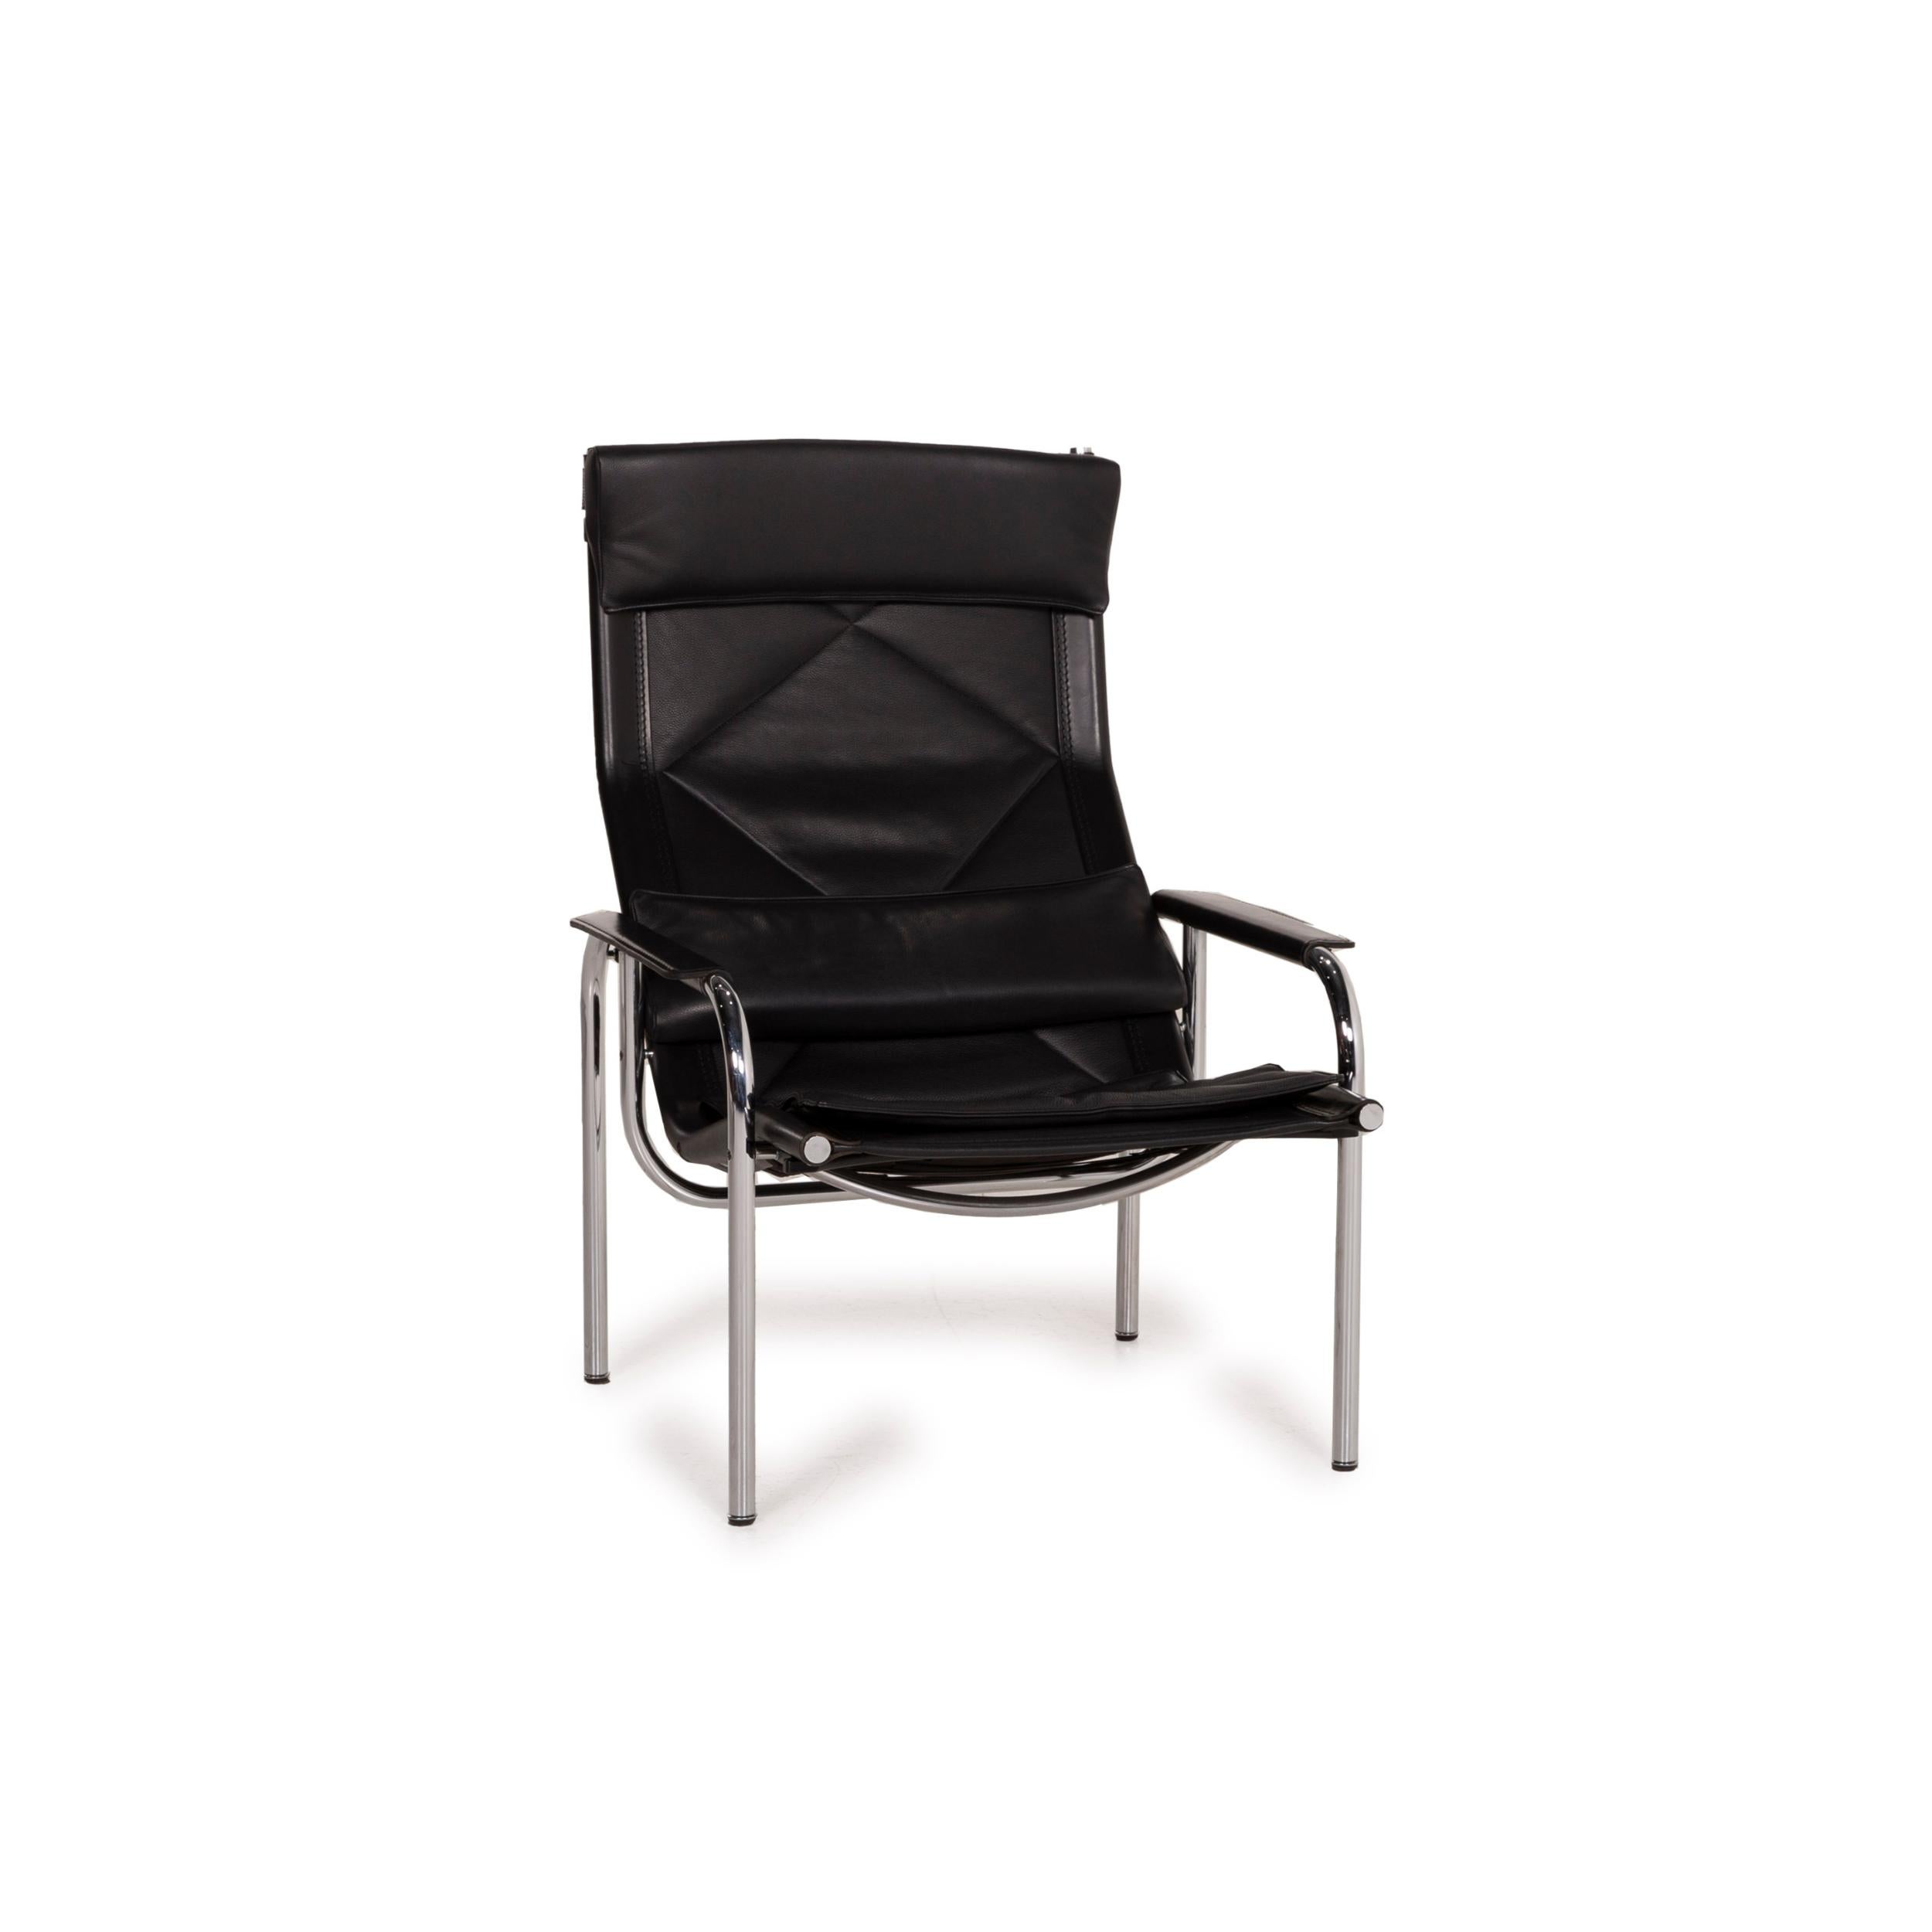 Strässle Eichenberger 127-3e-9 by Catellani & Smith Leather Armchair Black For Sale 2